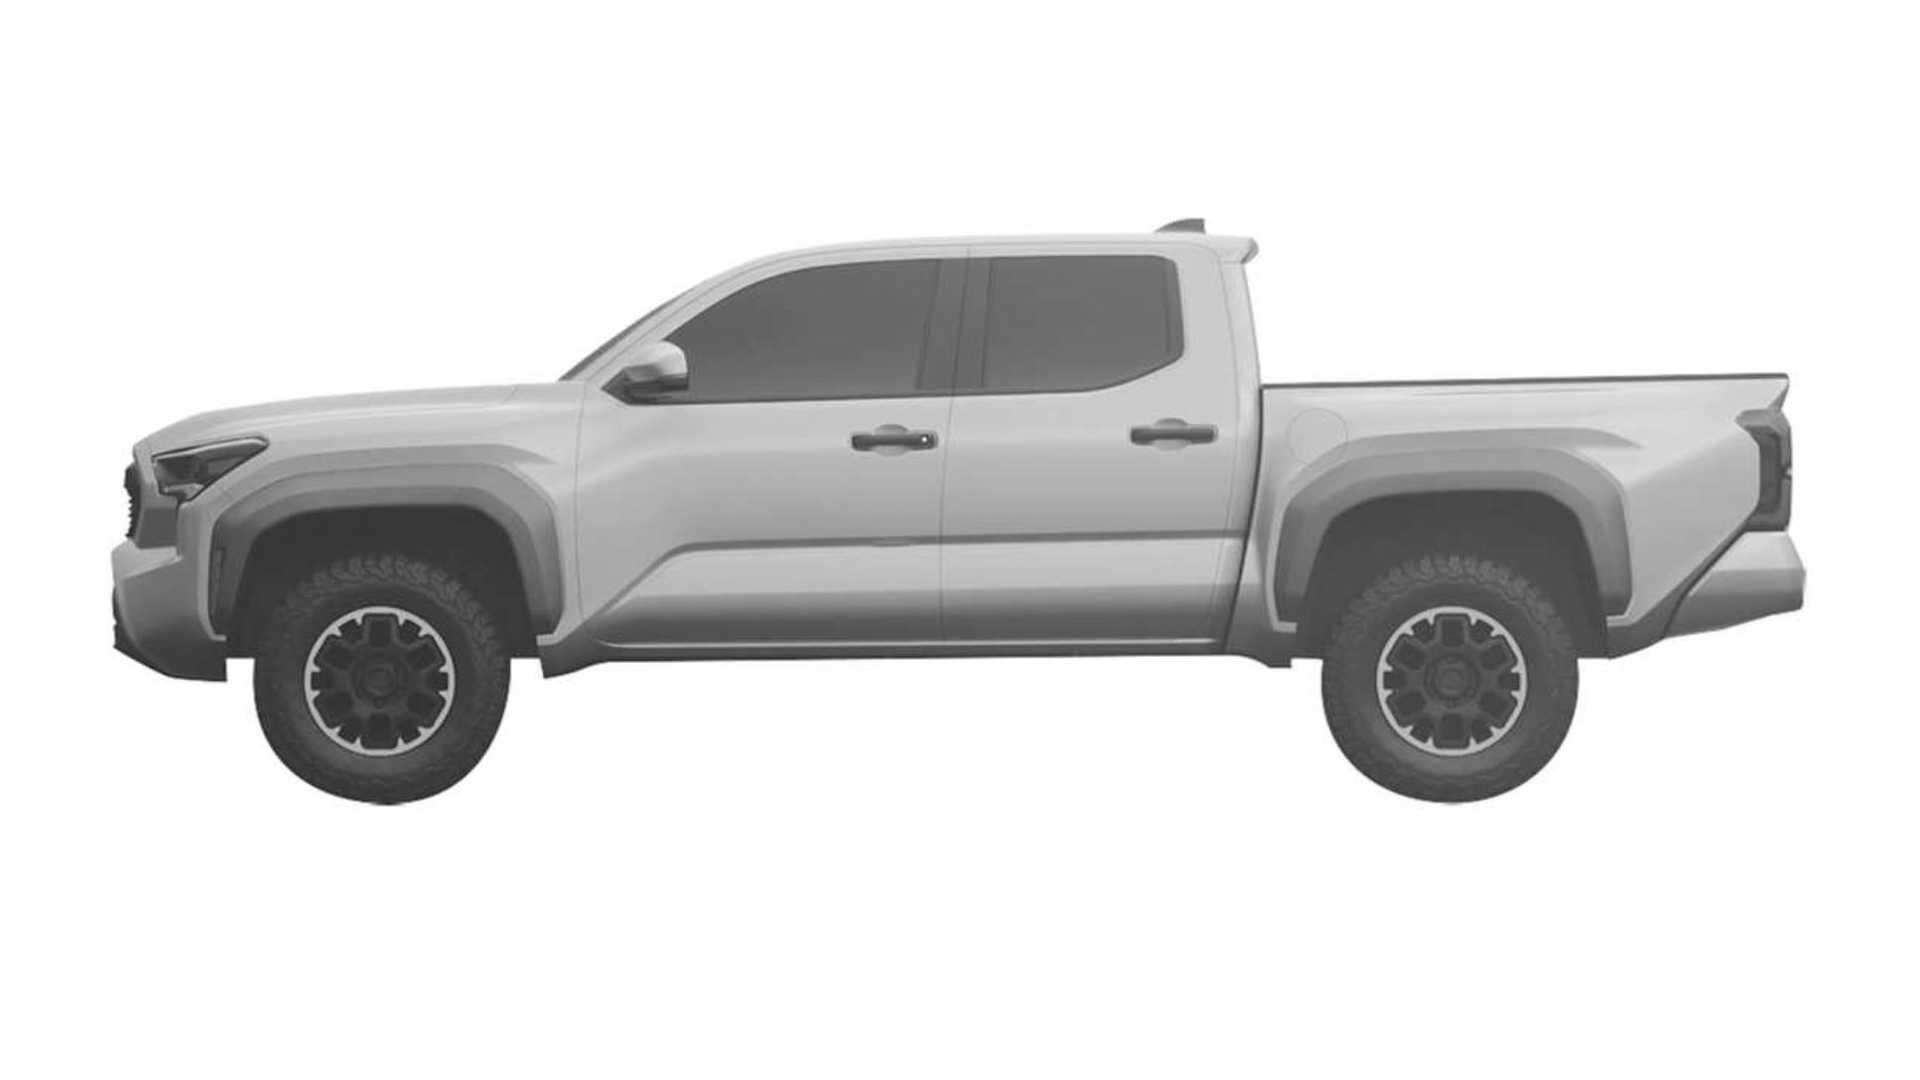 2024 Tacoma 2024 Tacoma Design Images Revealed in Patent! 📸 🕵🏻‍♂️ 2024 Toyota Tacoma 4th gen patent design 7